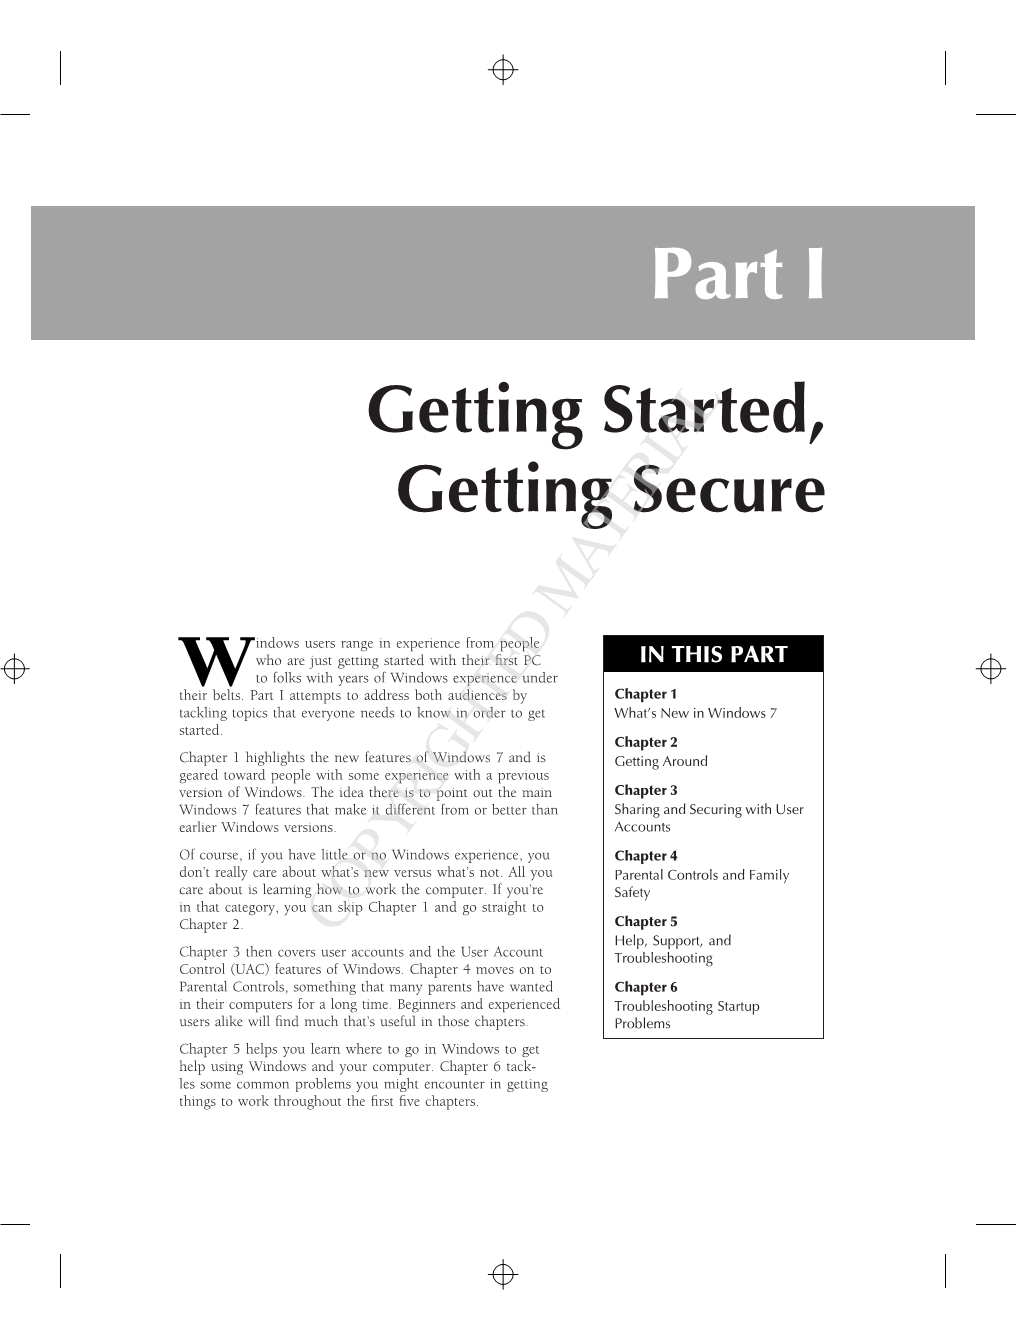 Part I Getting Started, Getting Secure